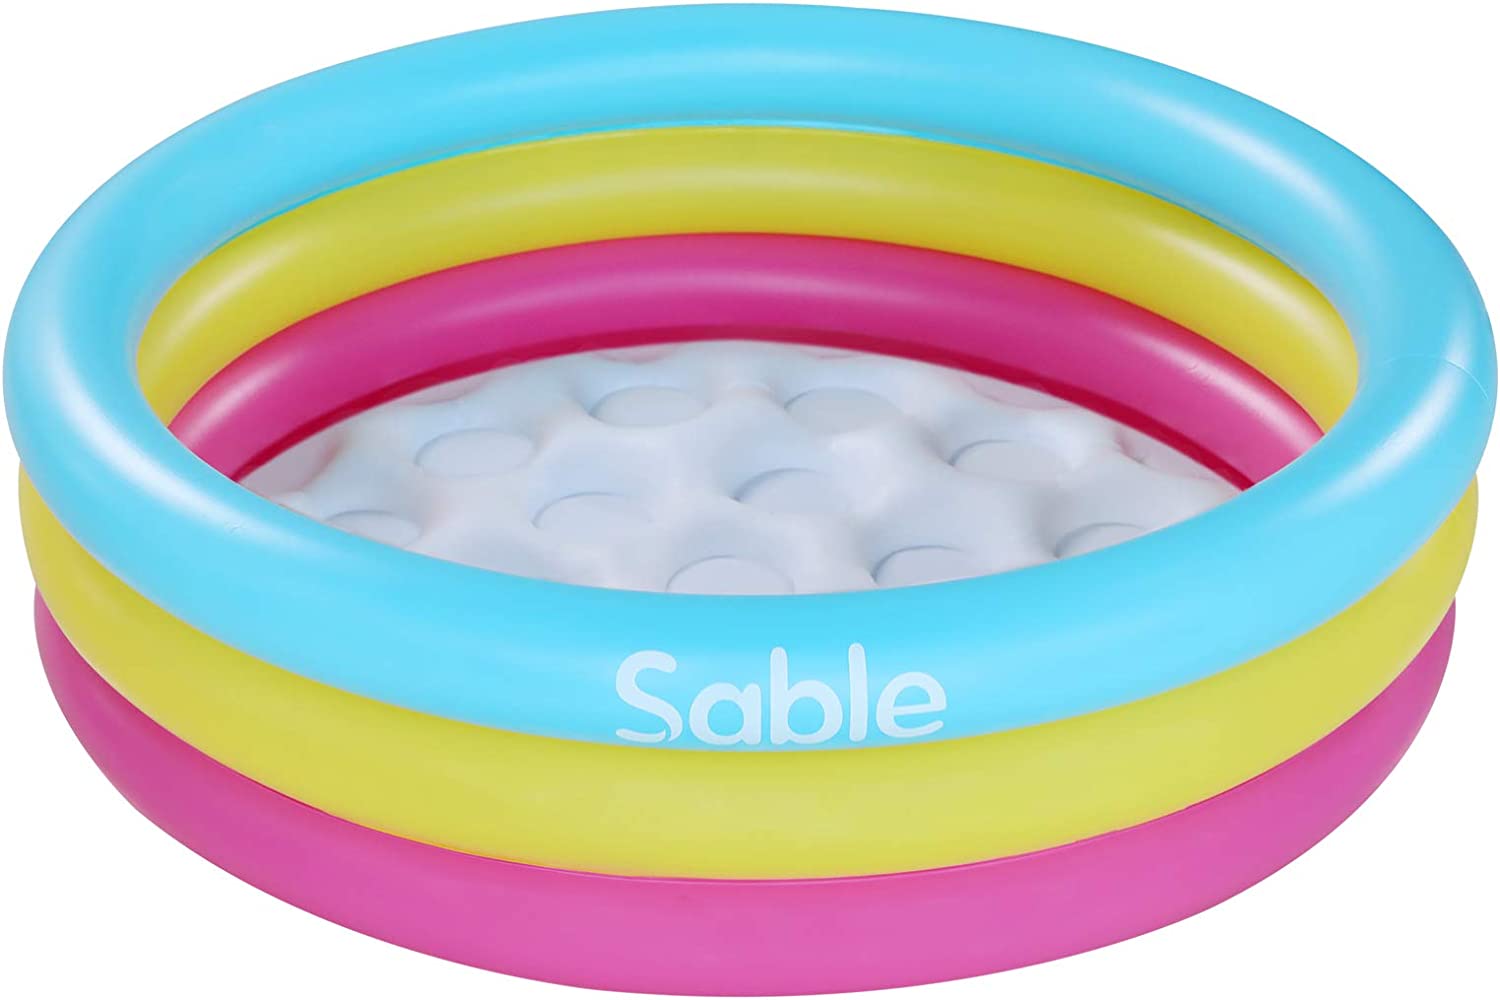 Sable Round Polyvinyl Chloride Inflatable Pool, 34-Inch